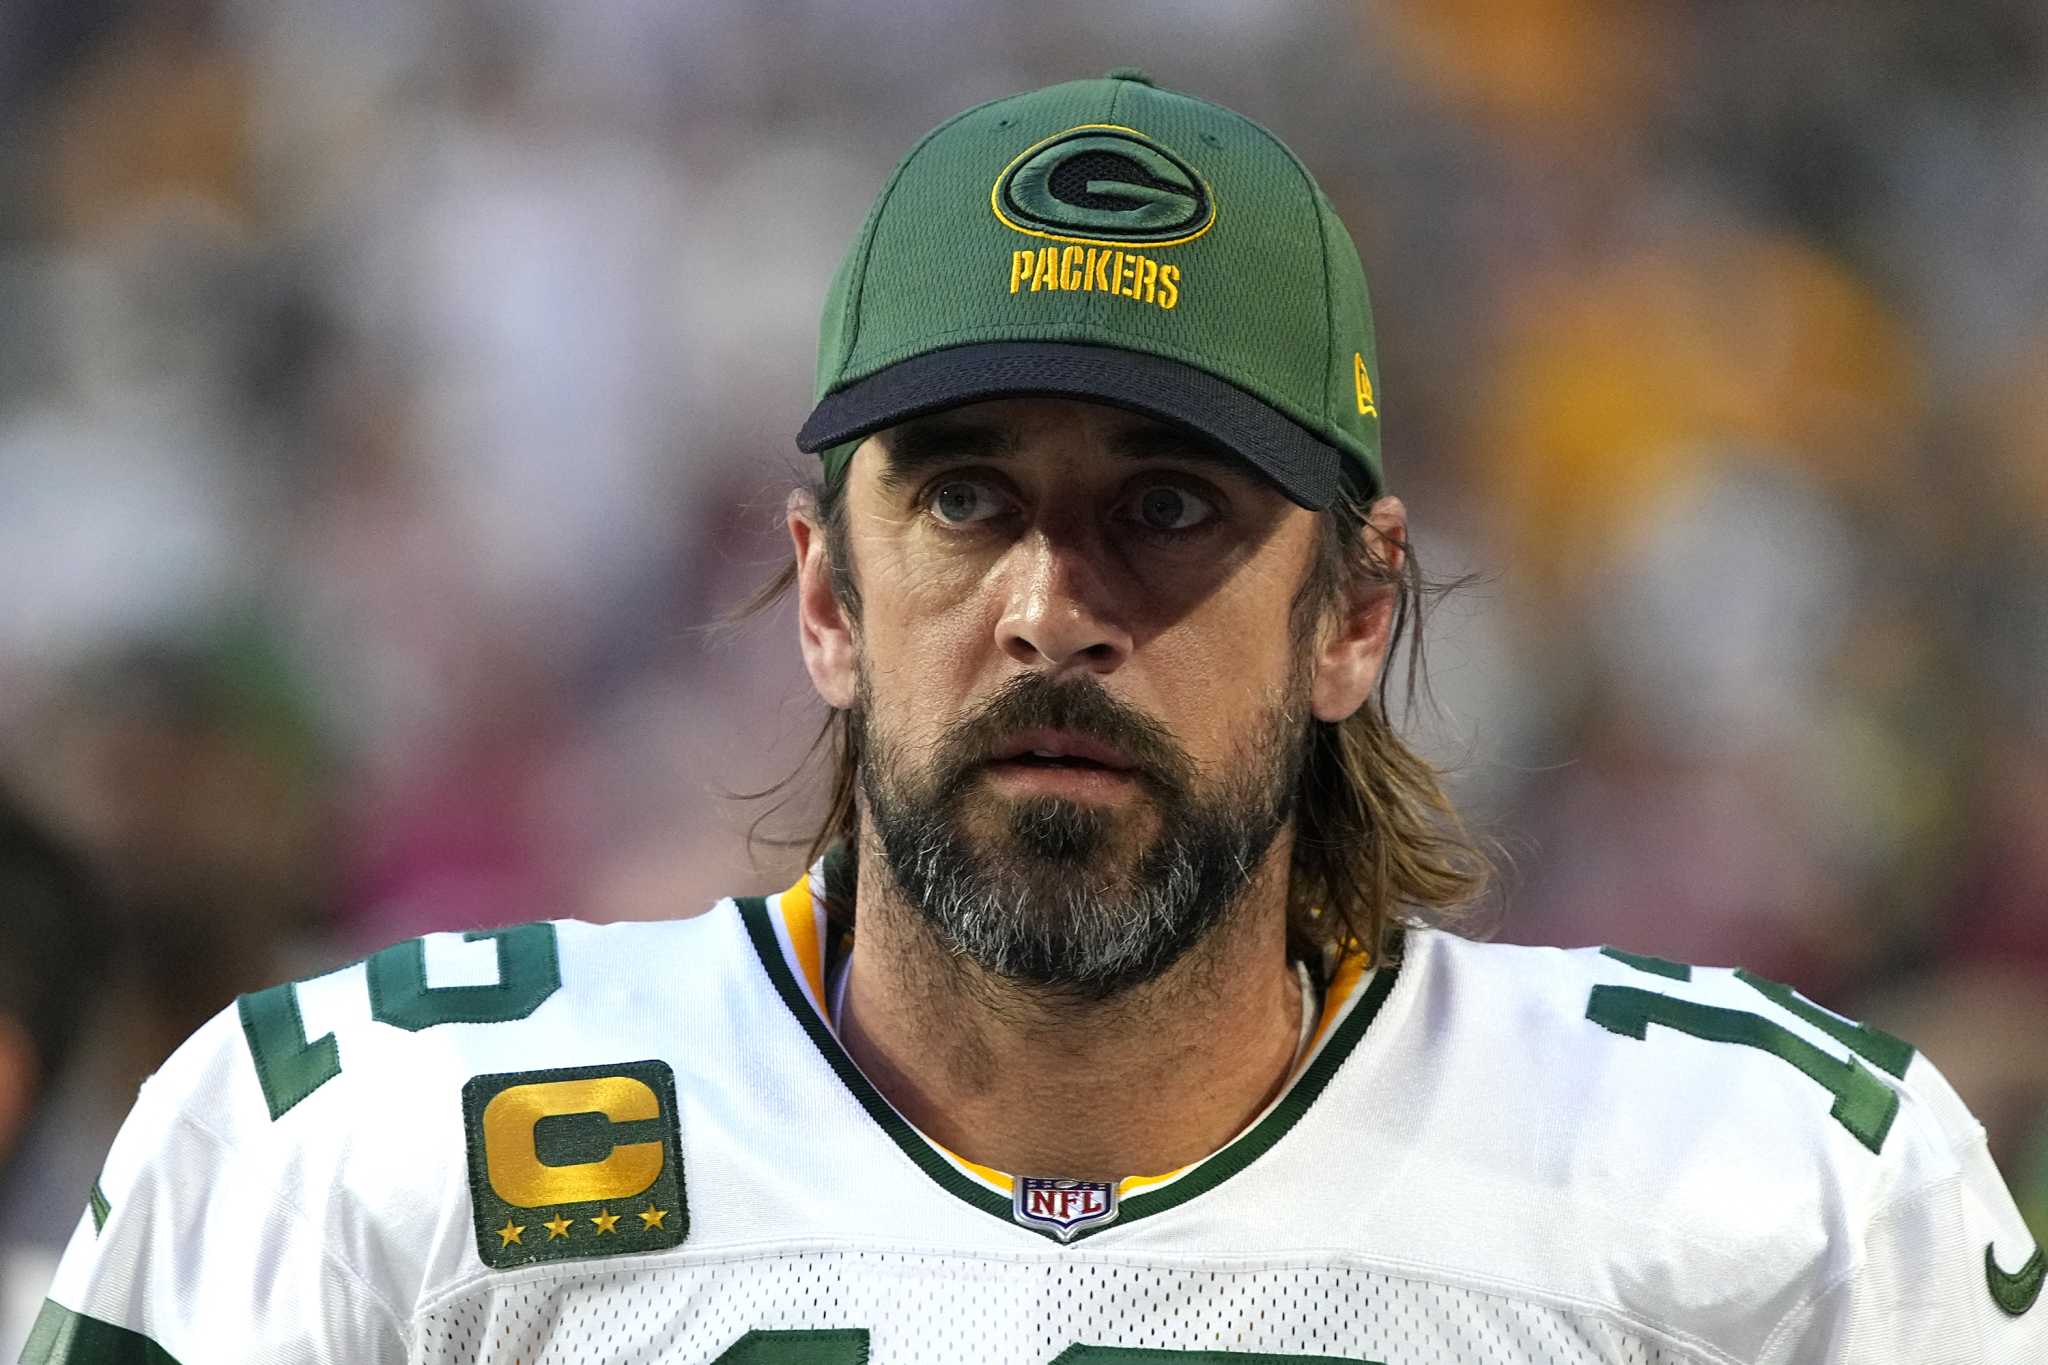 They're not the same old Jets with Aaron Rodgers on board